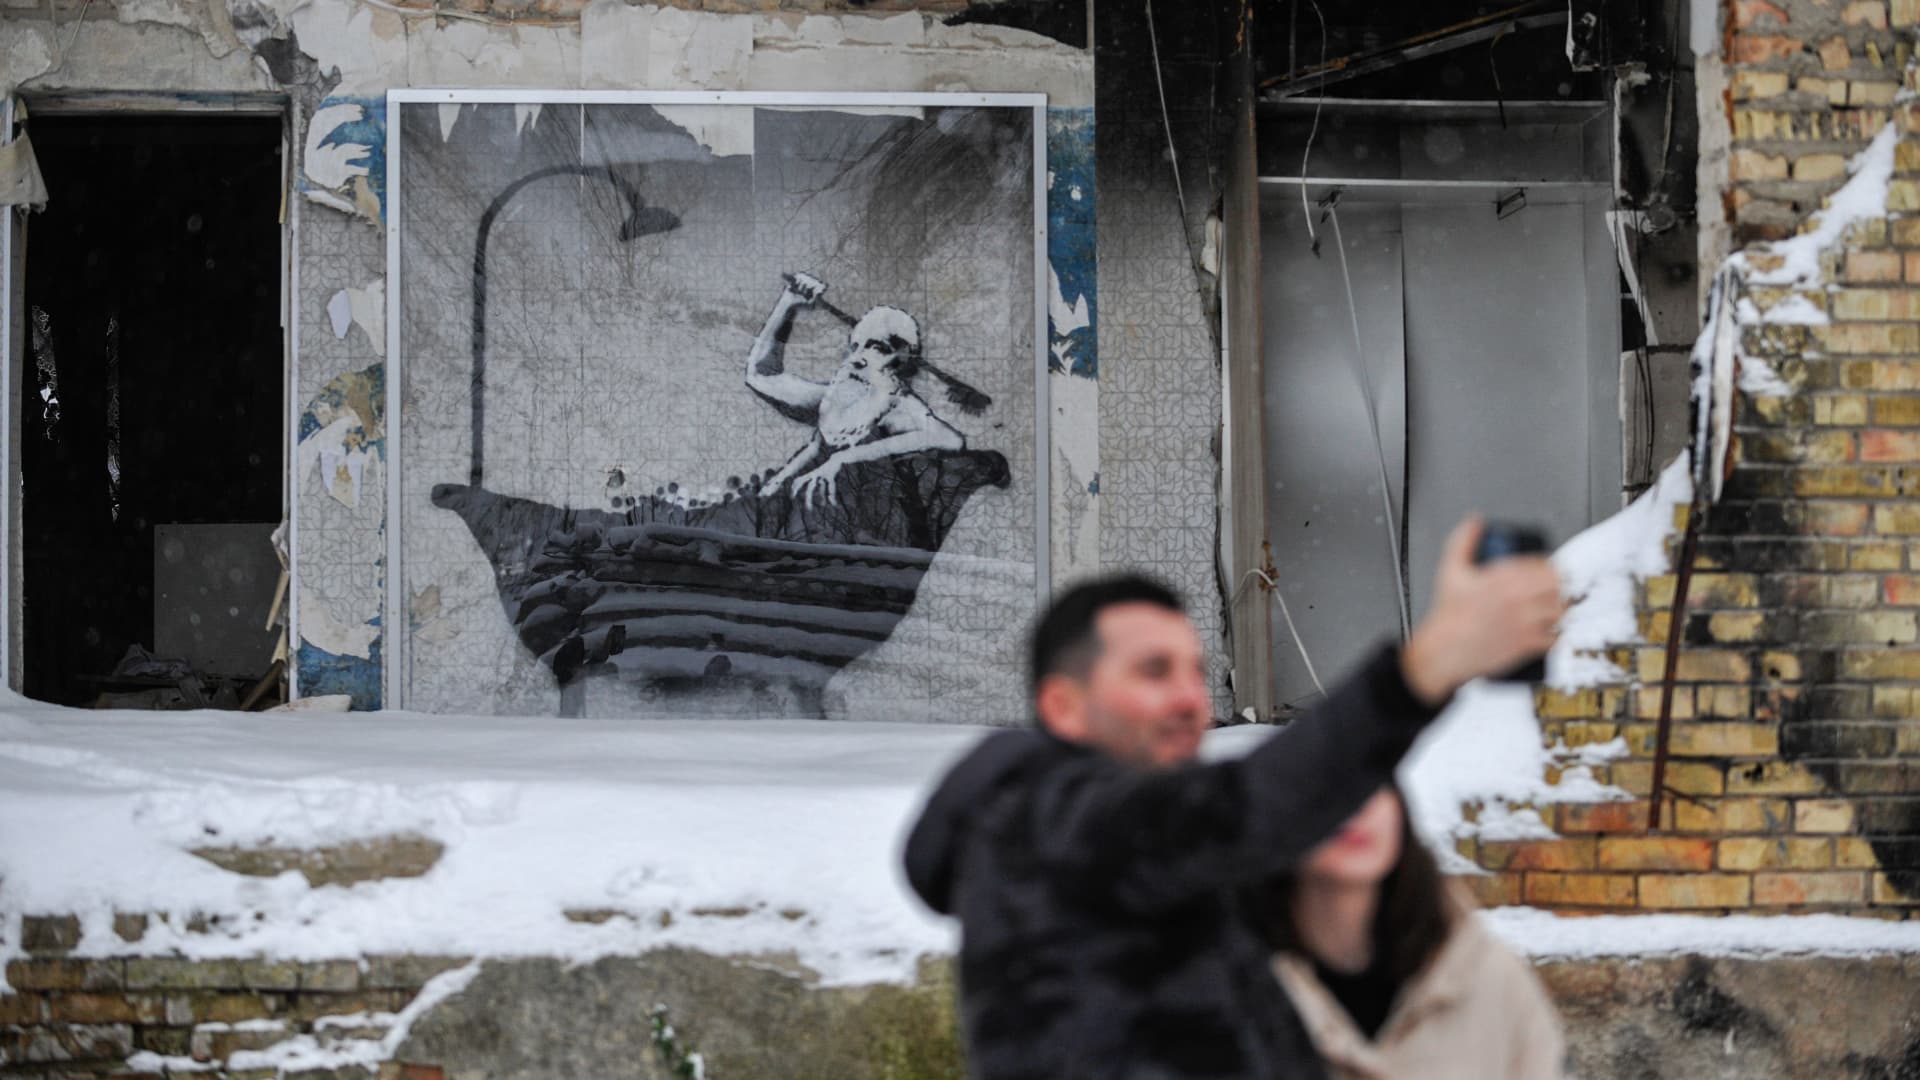 People take pictures in the background of graffiti by the famous anonymous street artist Banksy which is shown on one of the apartment buildings destroyed by the Russian army in Gorenka.